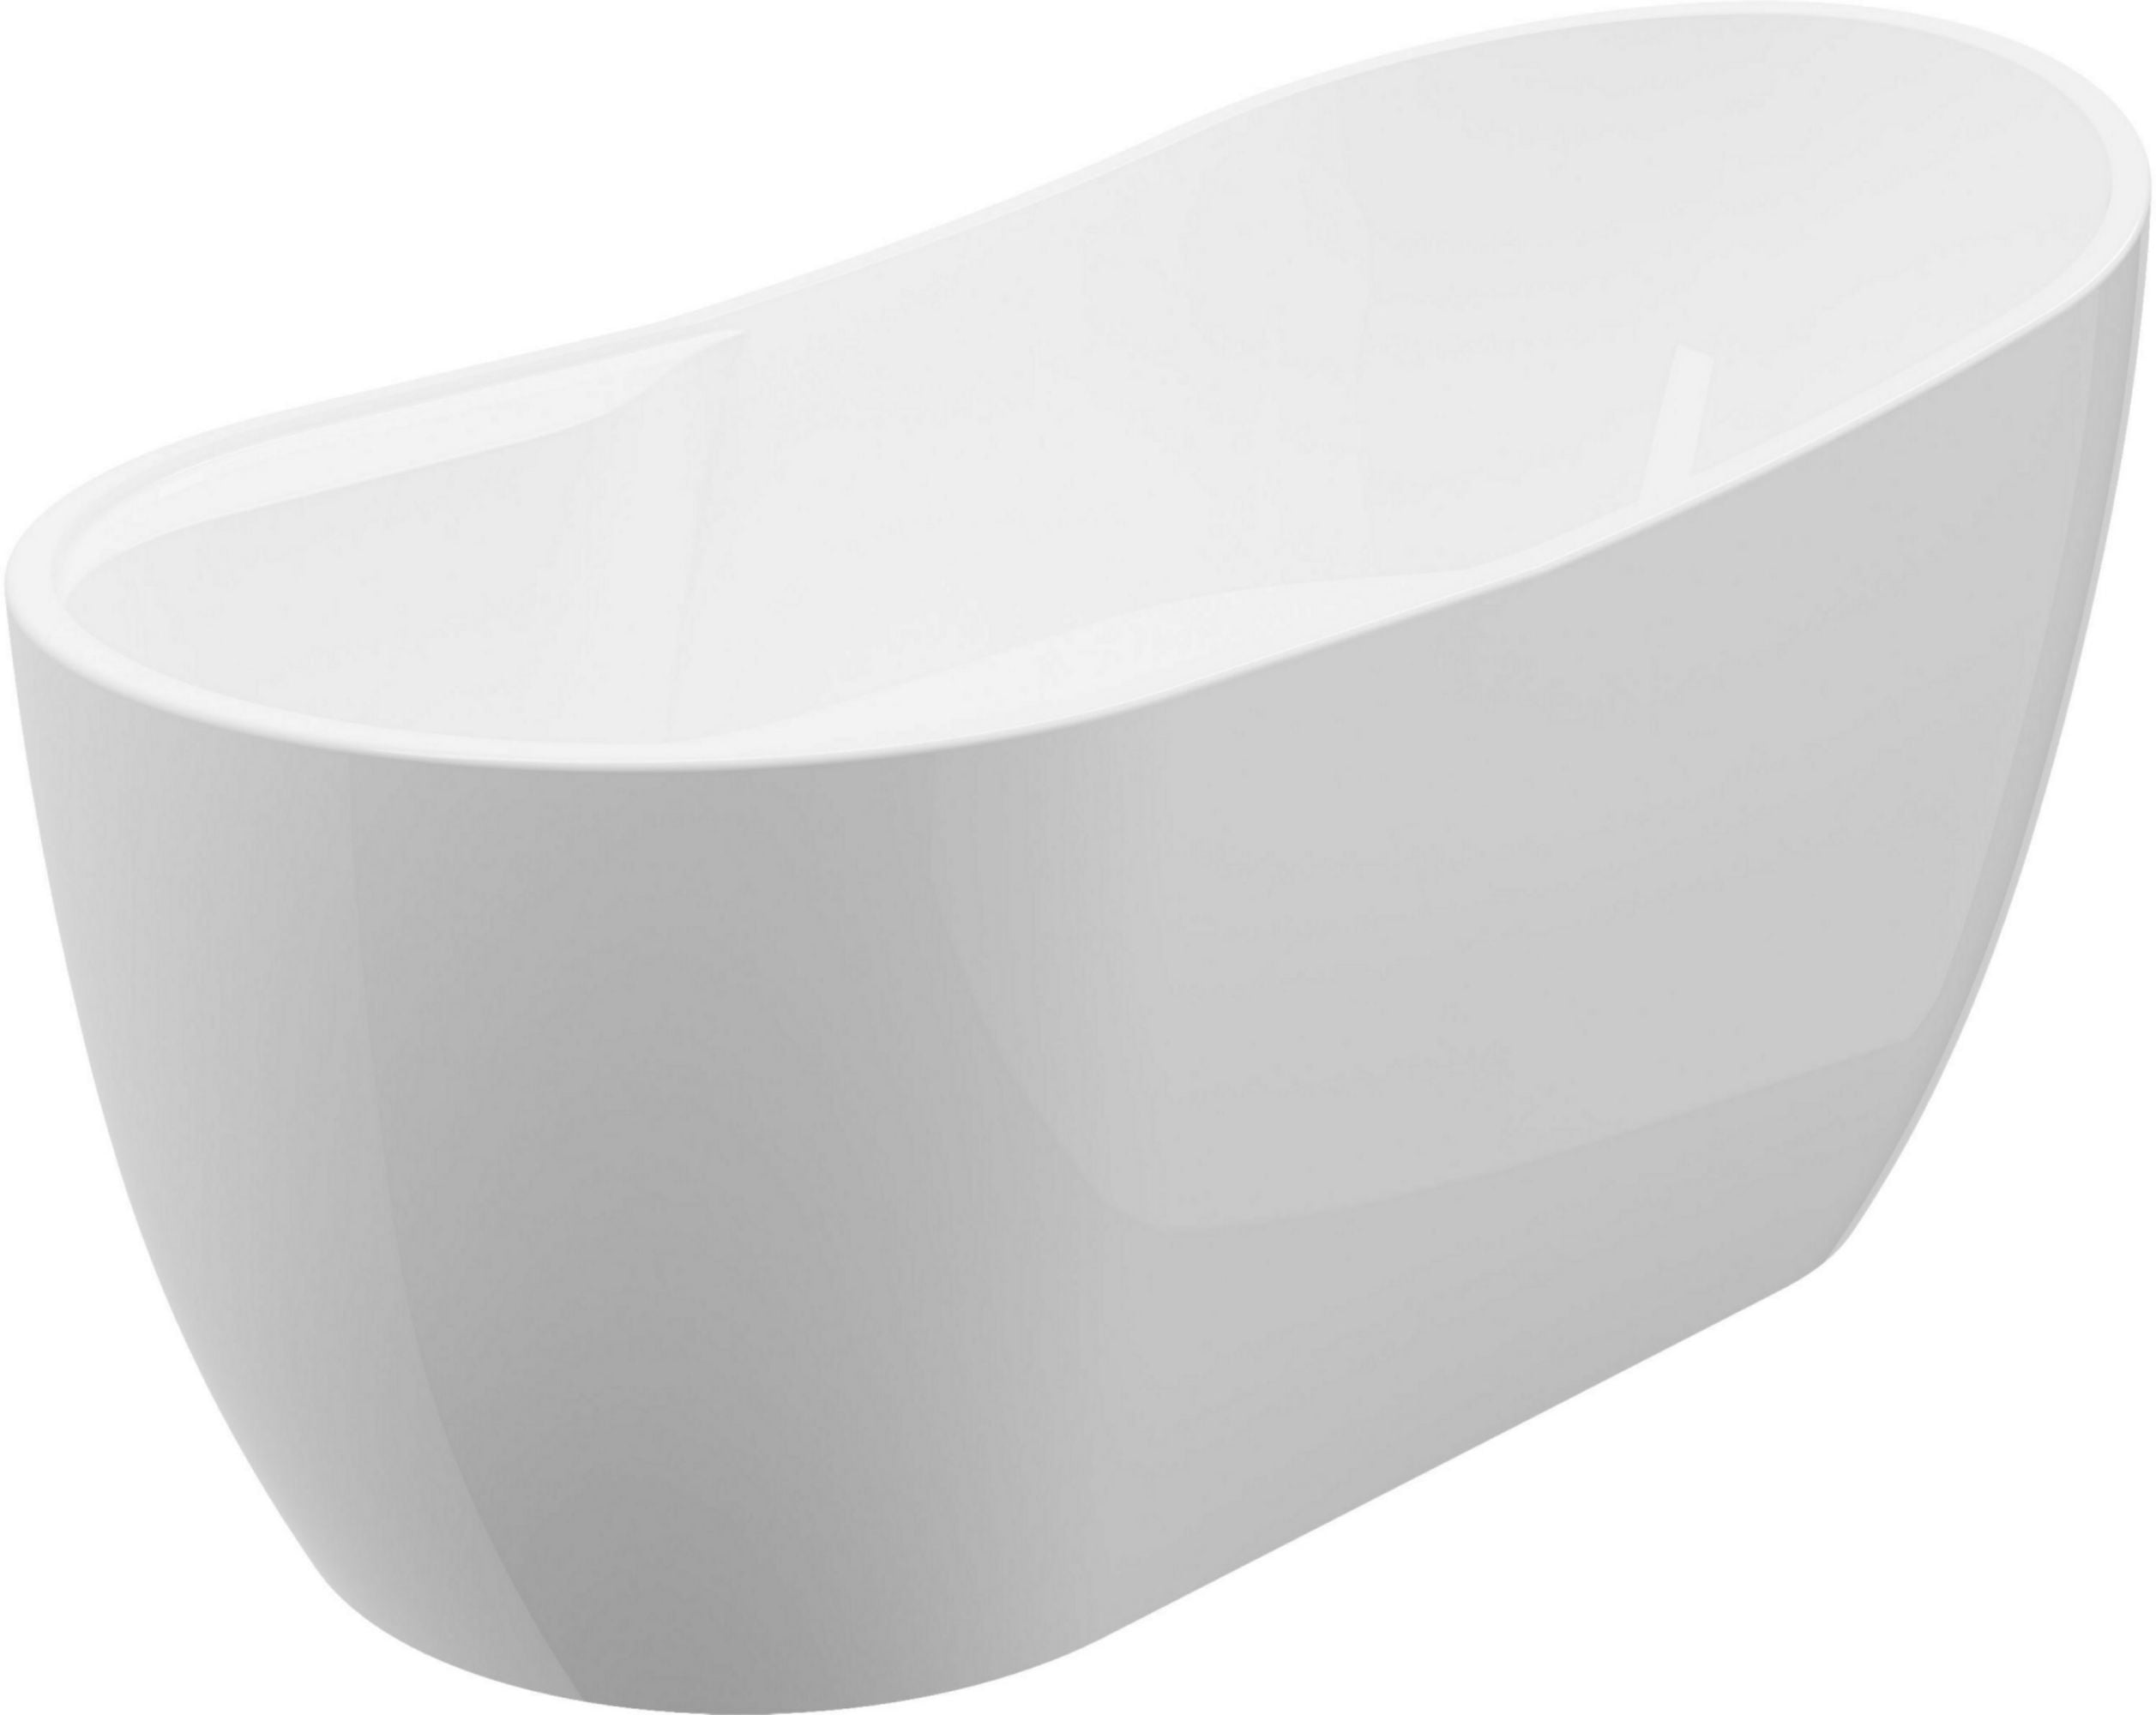 Picture of A & E Bath BT-0304-NF 59 in. Miami Freestanding Tub without Faucet